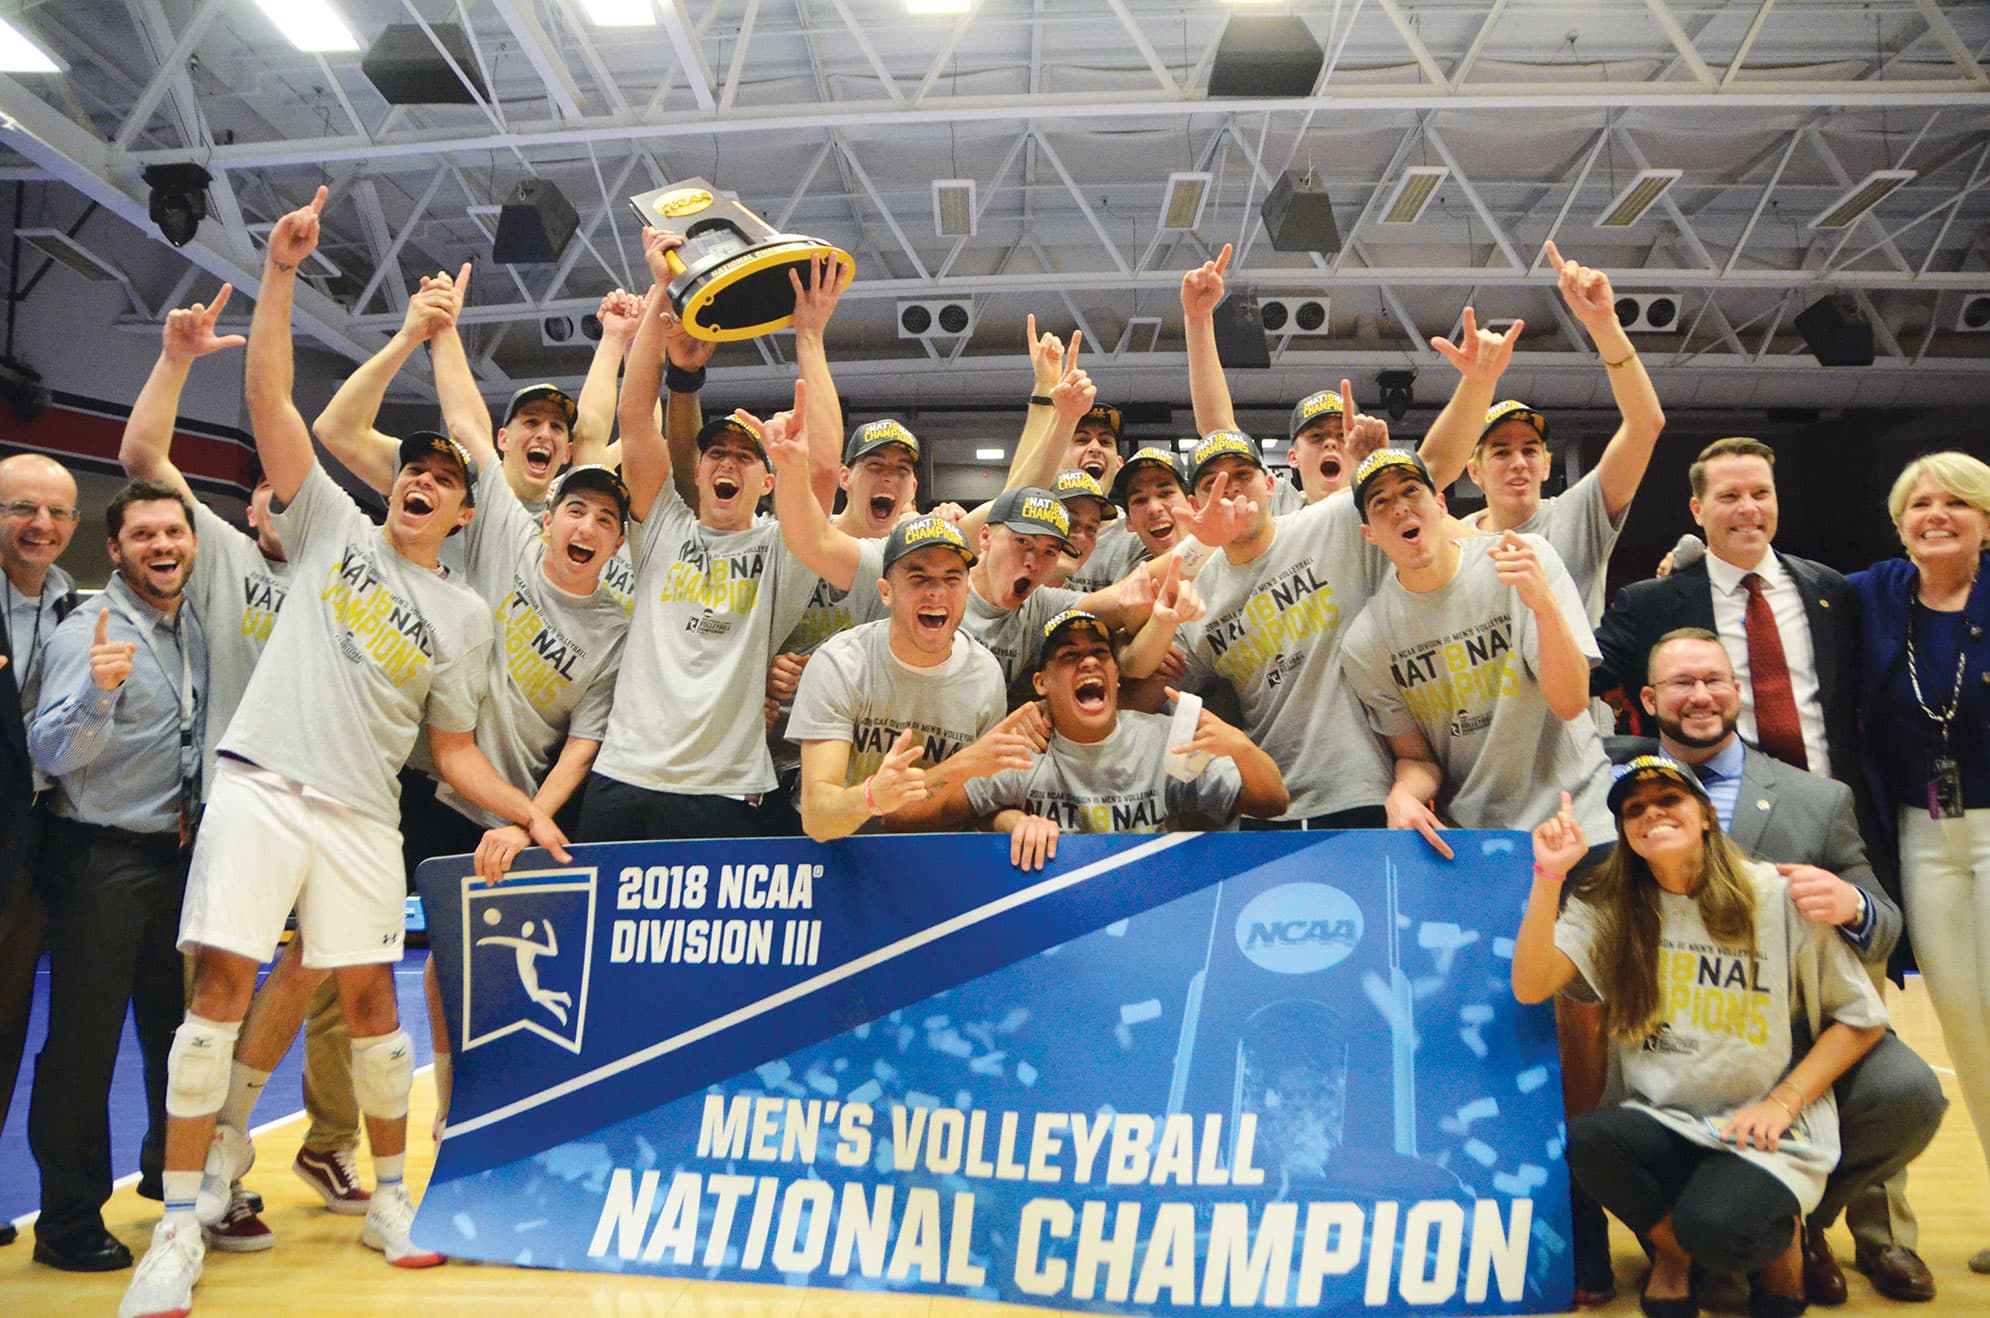 Men's Volleyball NCAA Division III National Champions